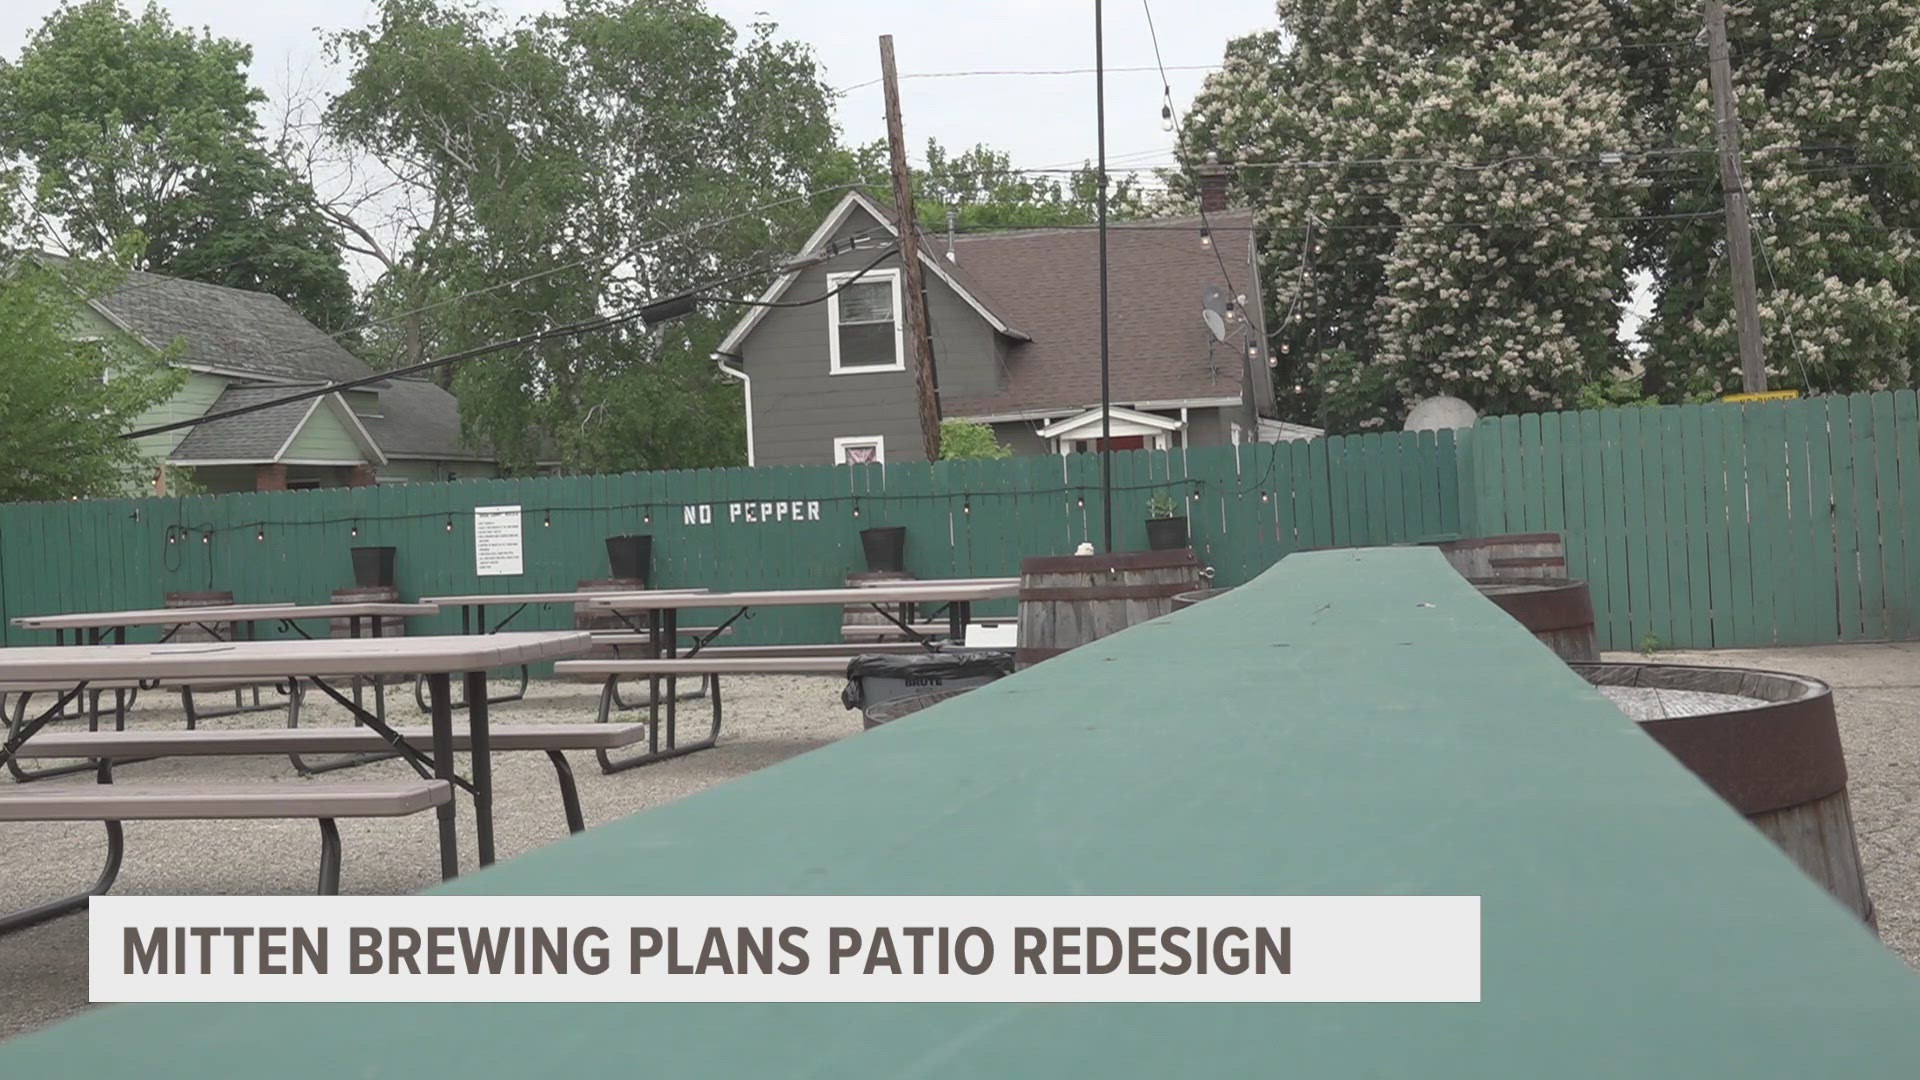 A co-owner of the baseball-themed Grand Rapids brewery described the look of the current patio as being "a relic of COVID," and he's excited for a new aesthetic.